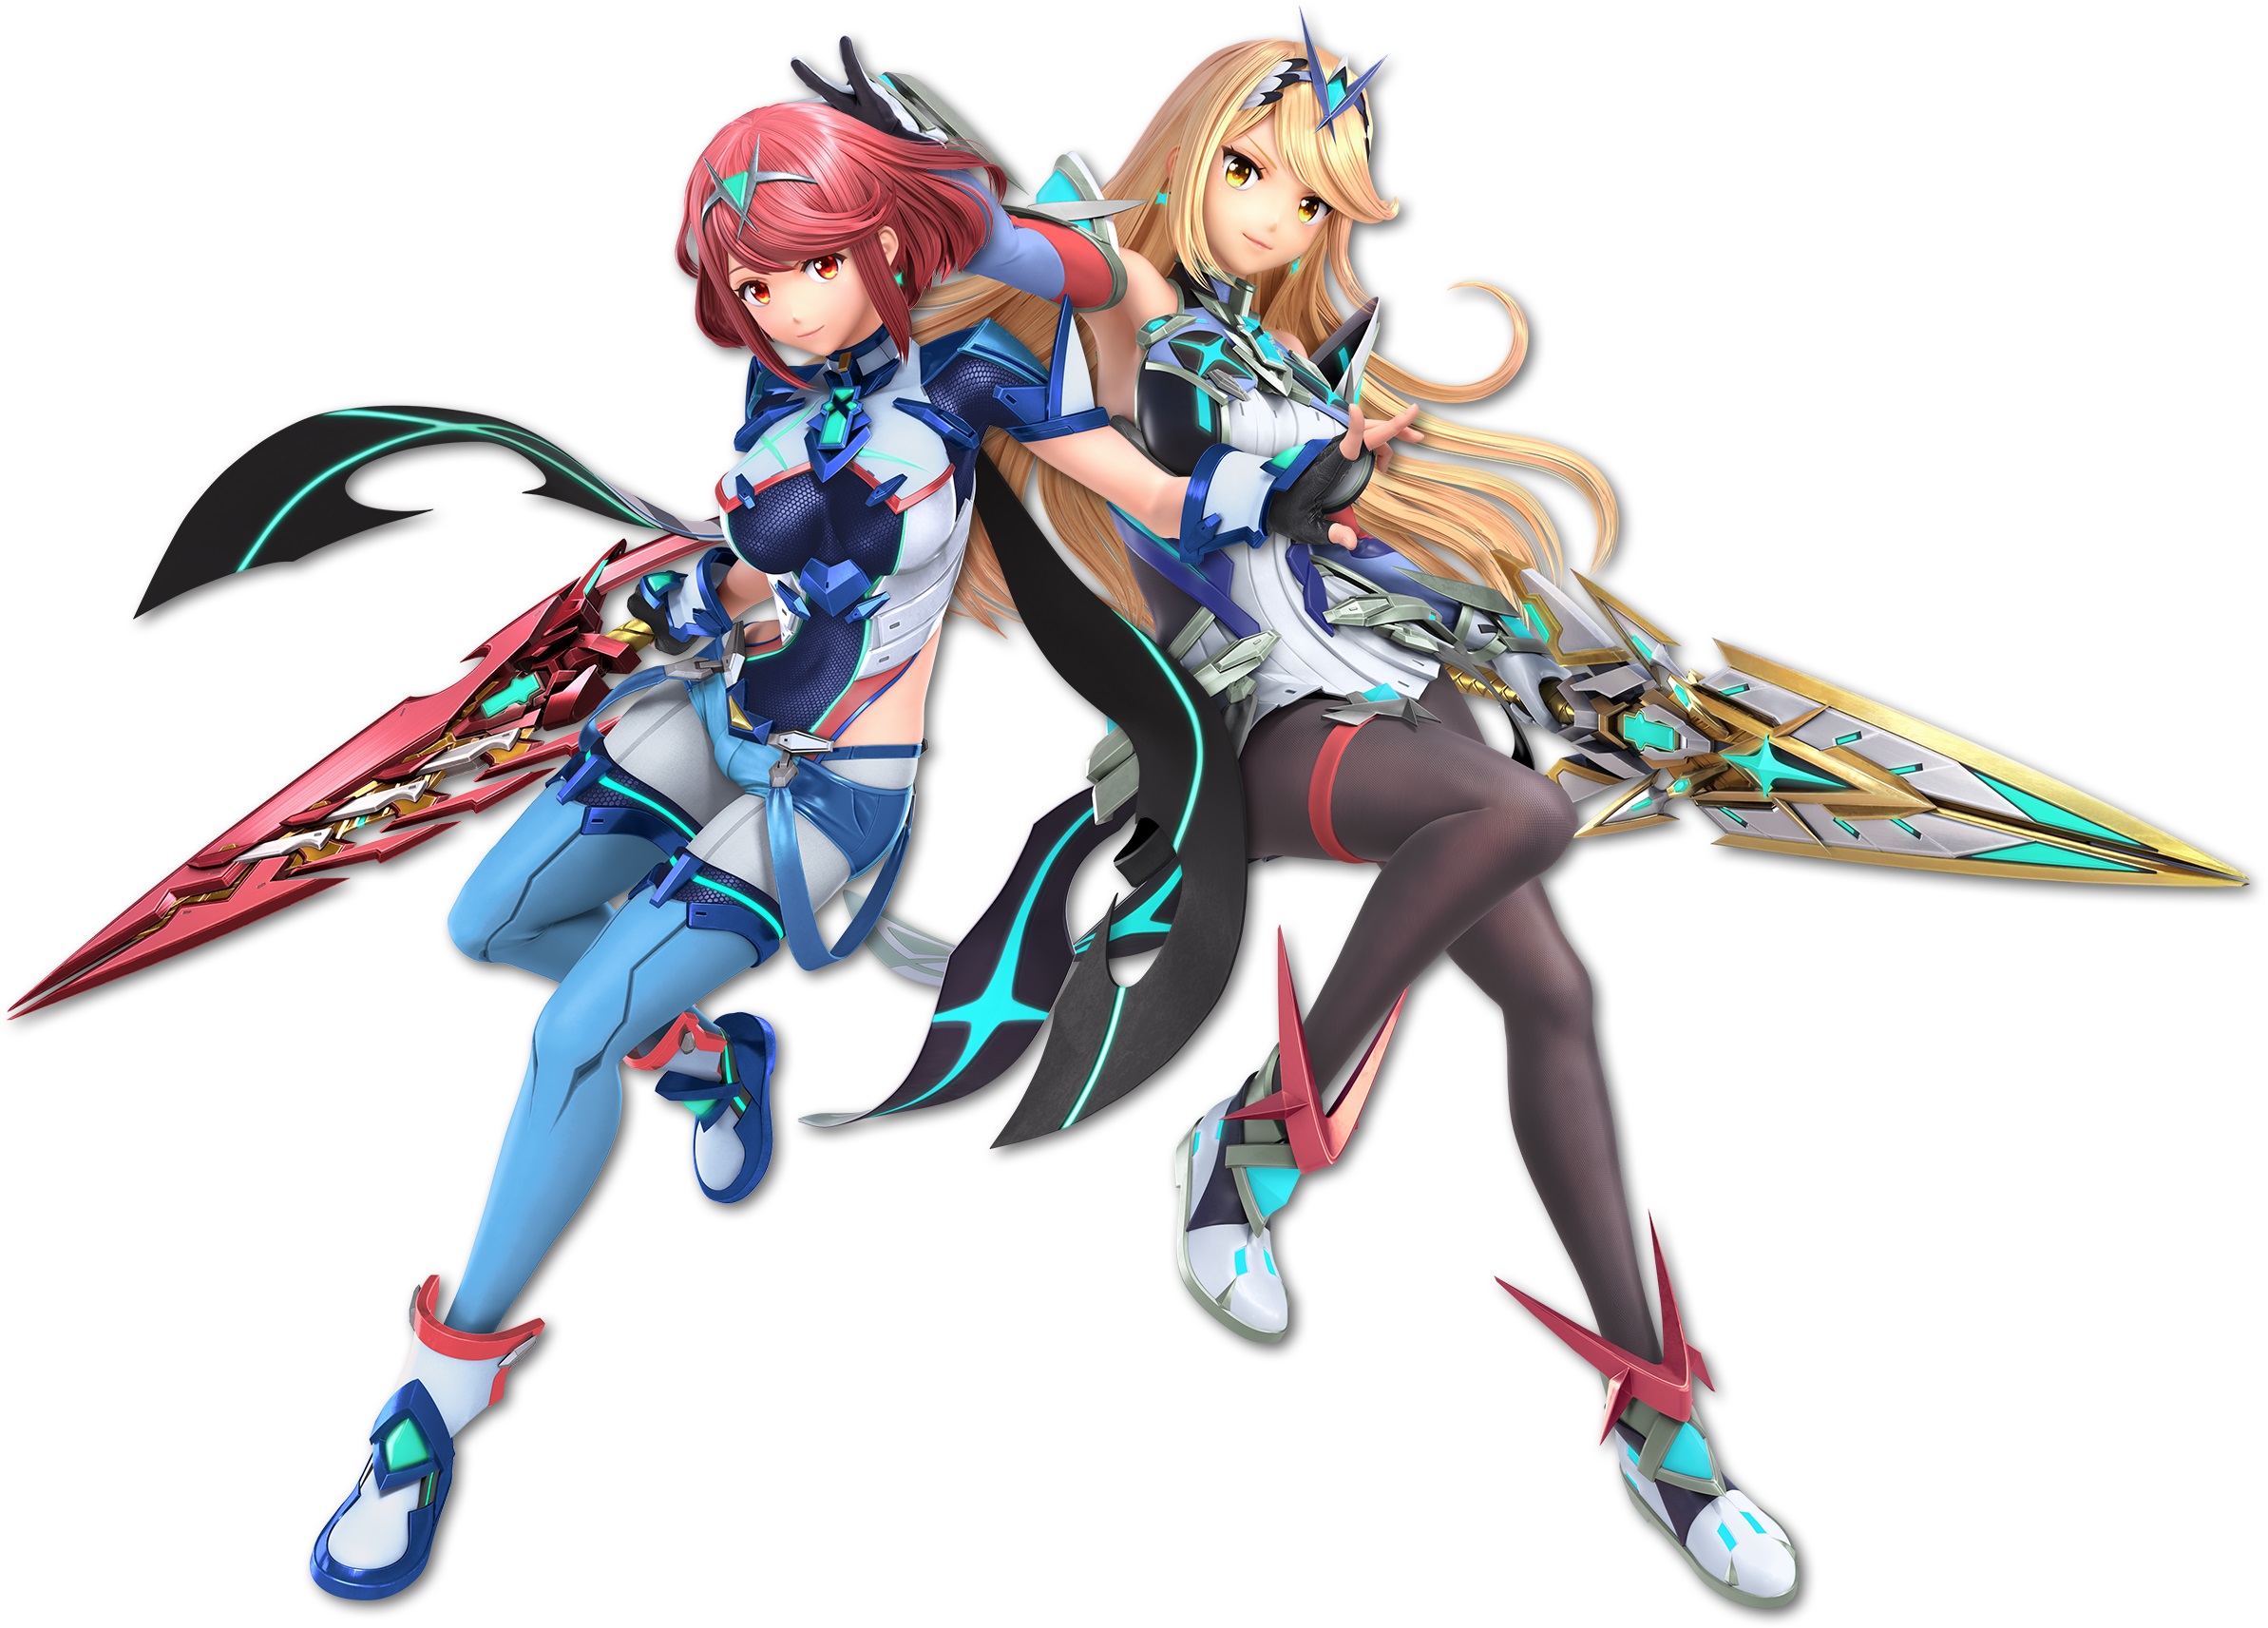 Pyra/Mythra will be available in Super Smash Bros. 